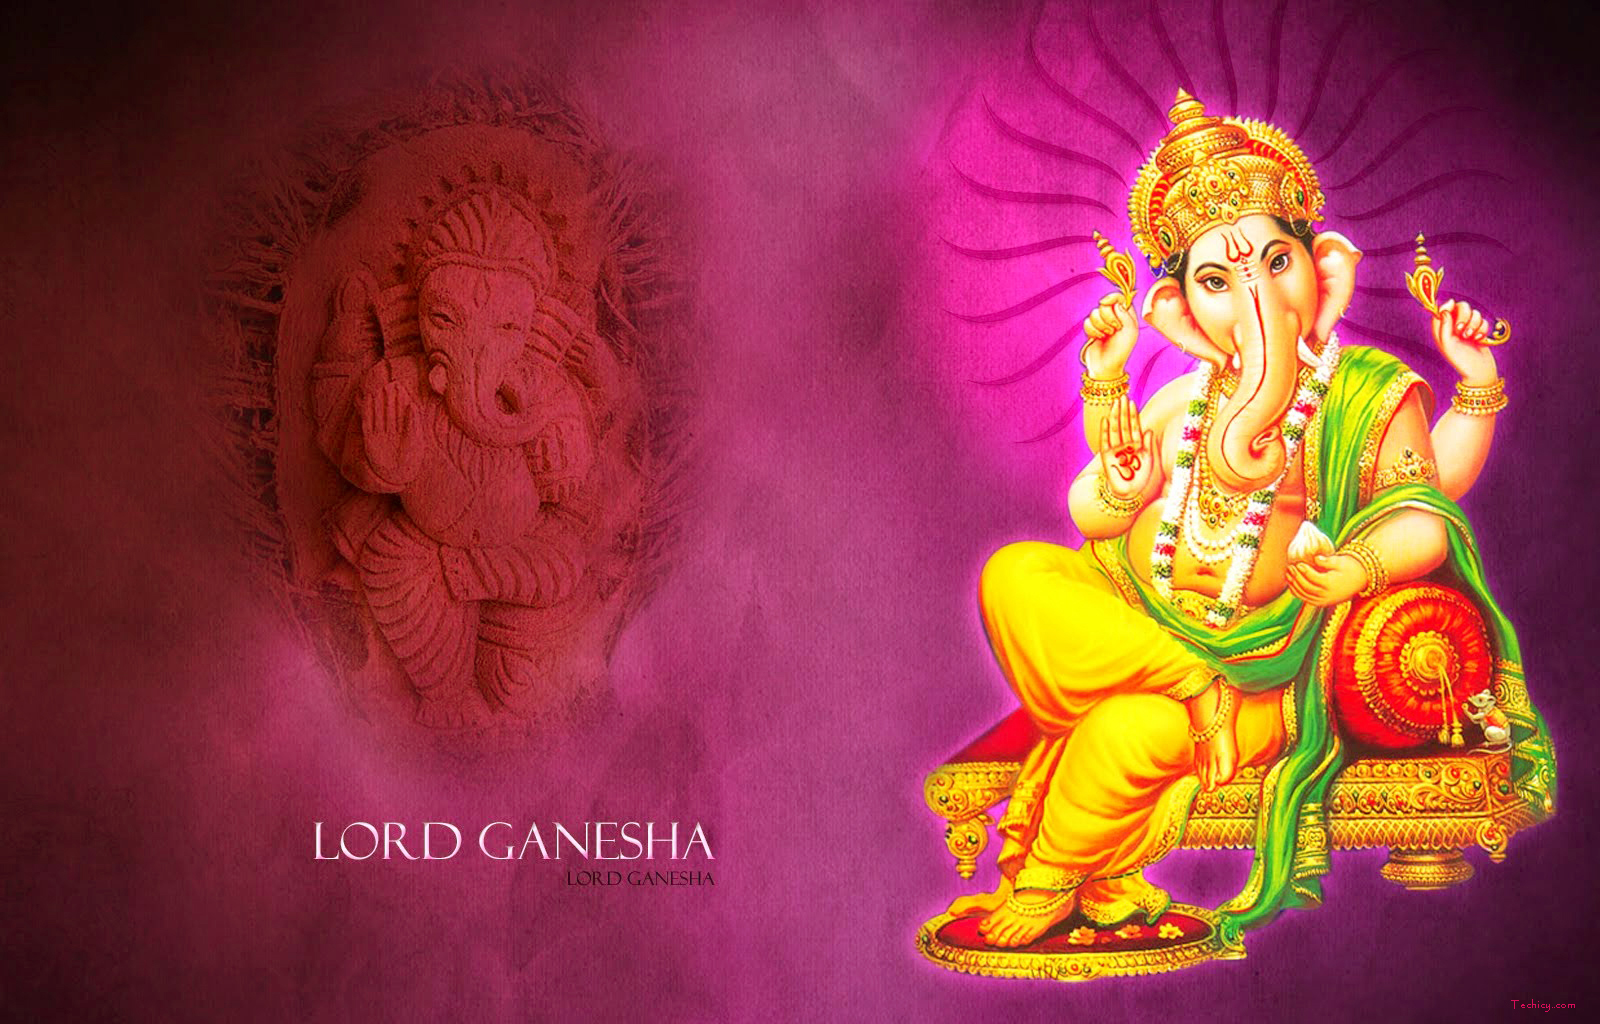 Ganesh chaturthi hd images wallpapers pics and photos free download